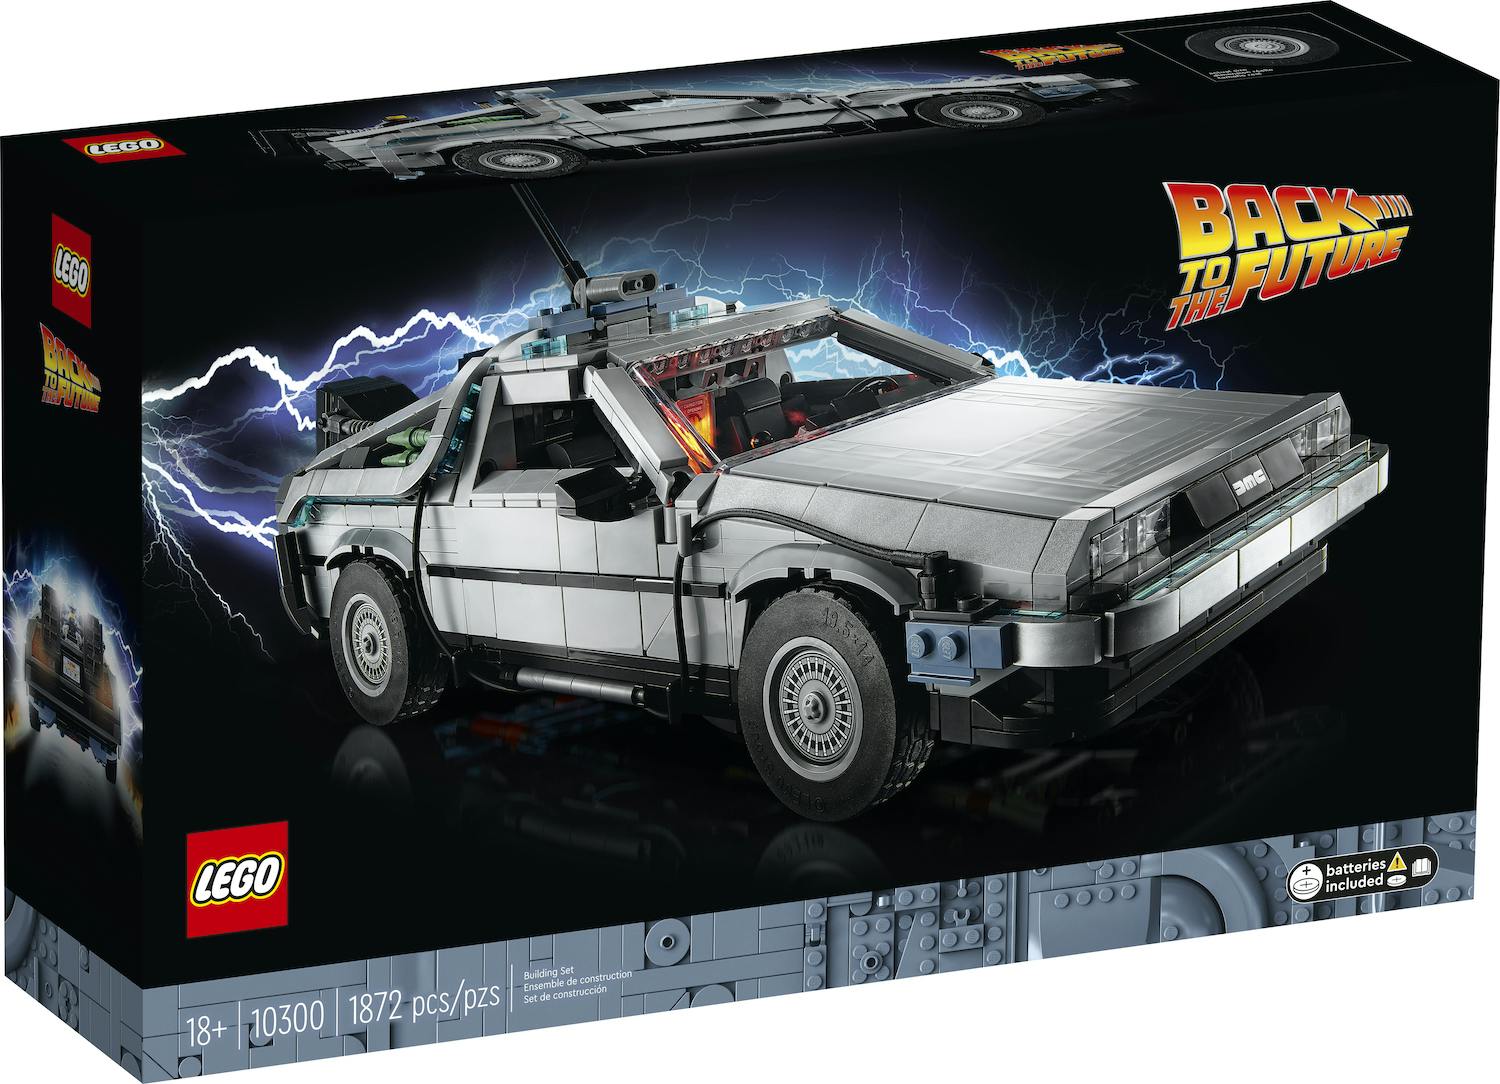 Back to the Future Time Machine LEGO Toy box